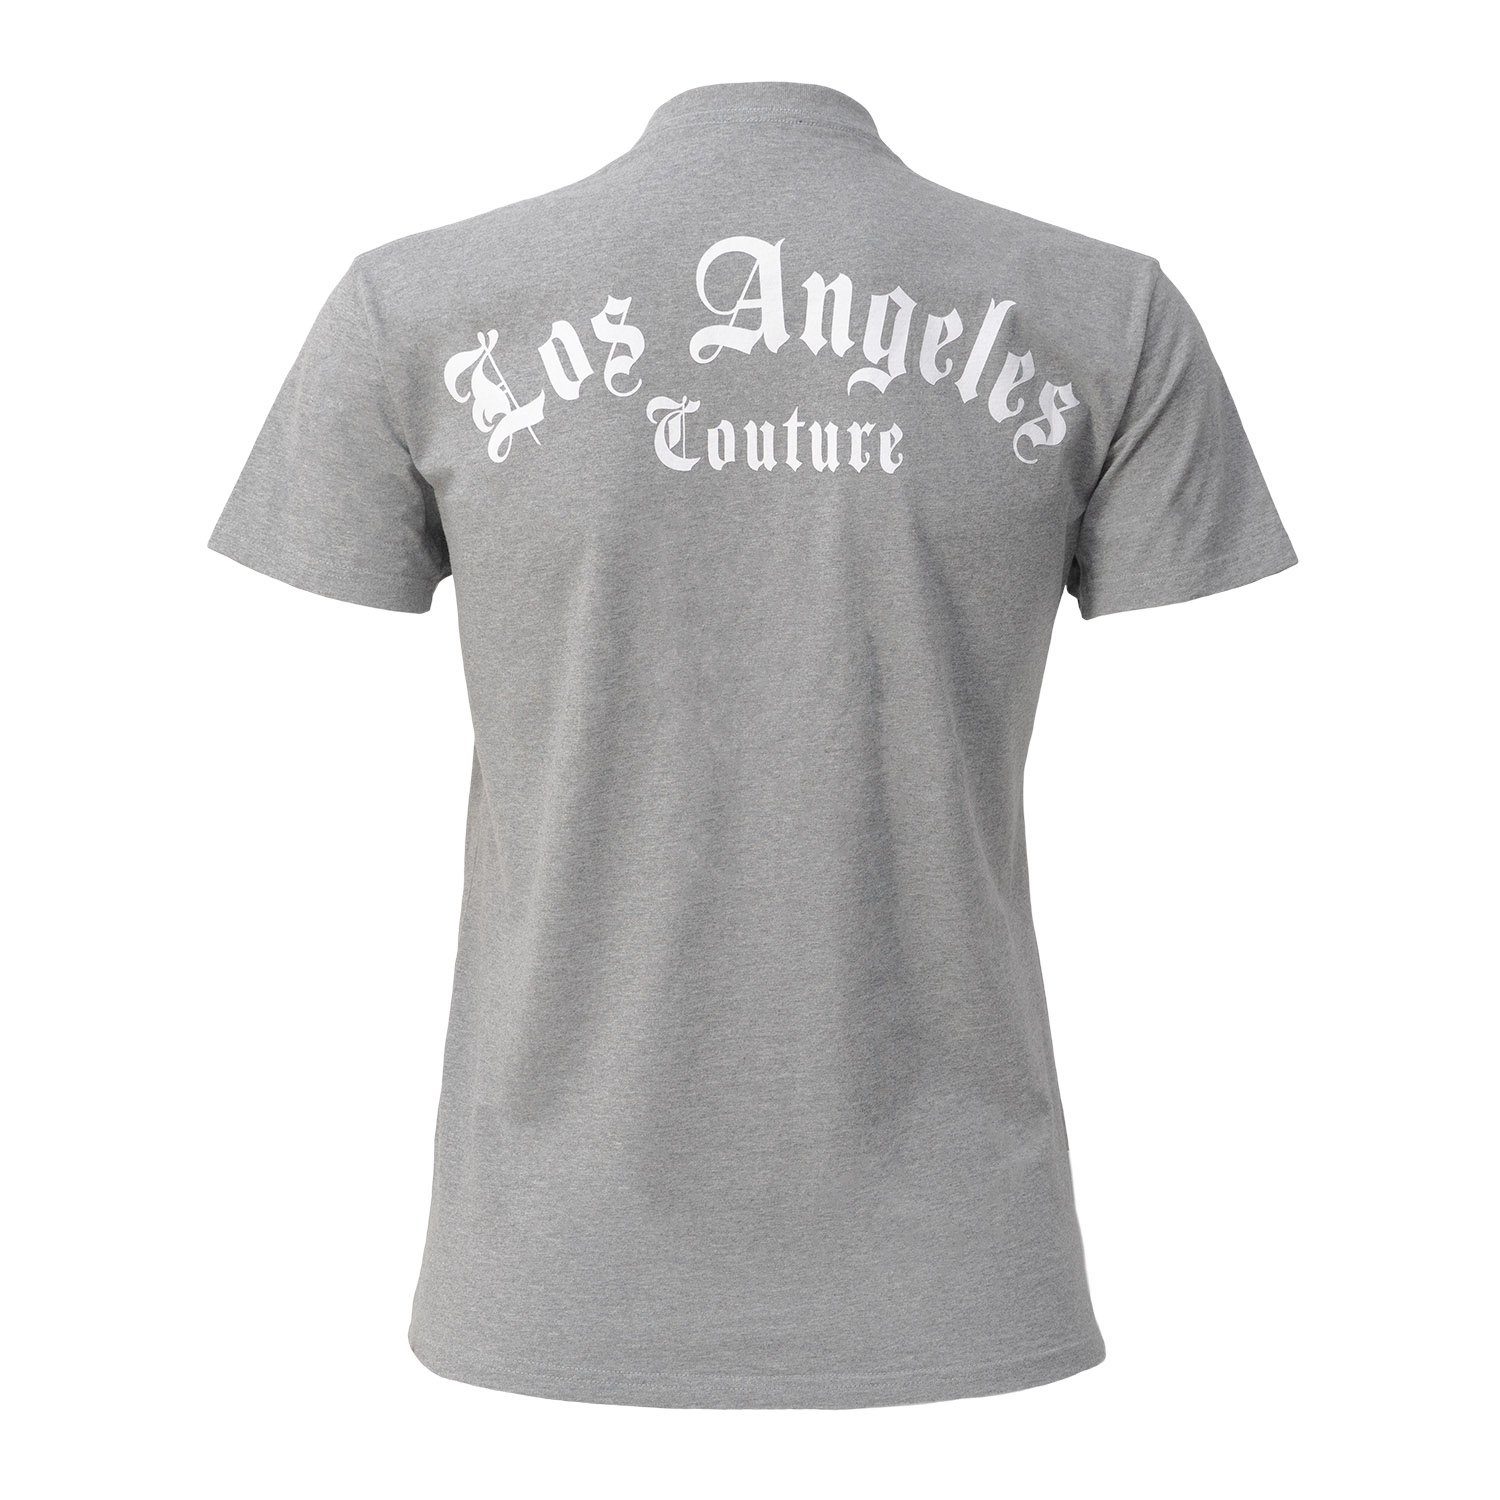 Brand Chiccheria Designed Angeles, T-Shirt in Los Couture Grau Angeles Los